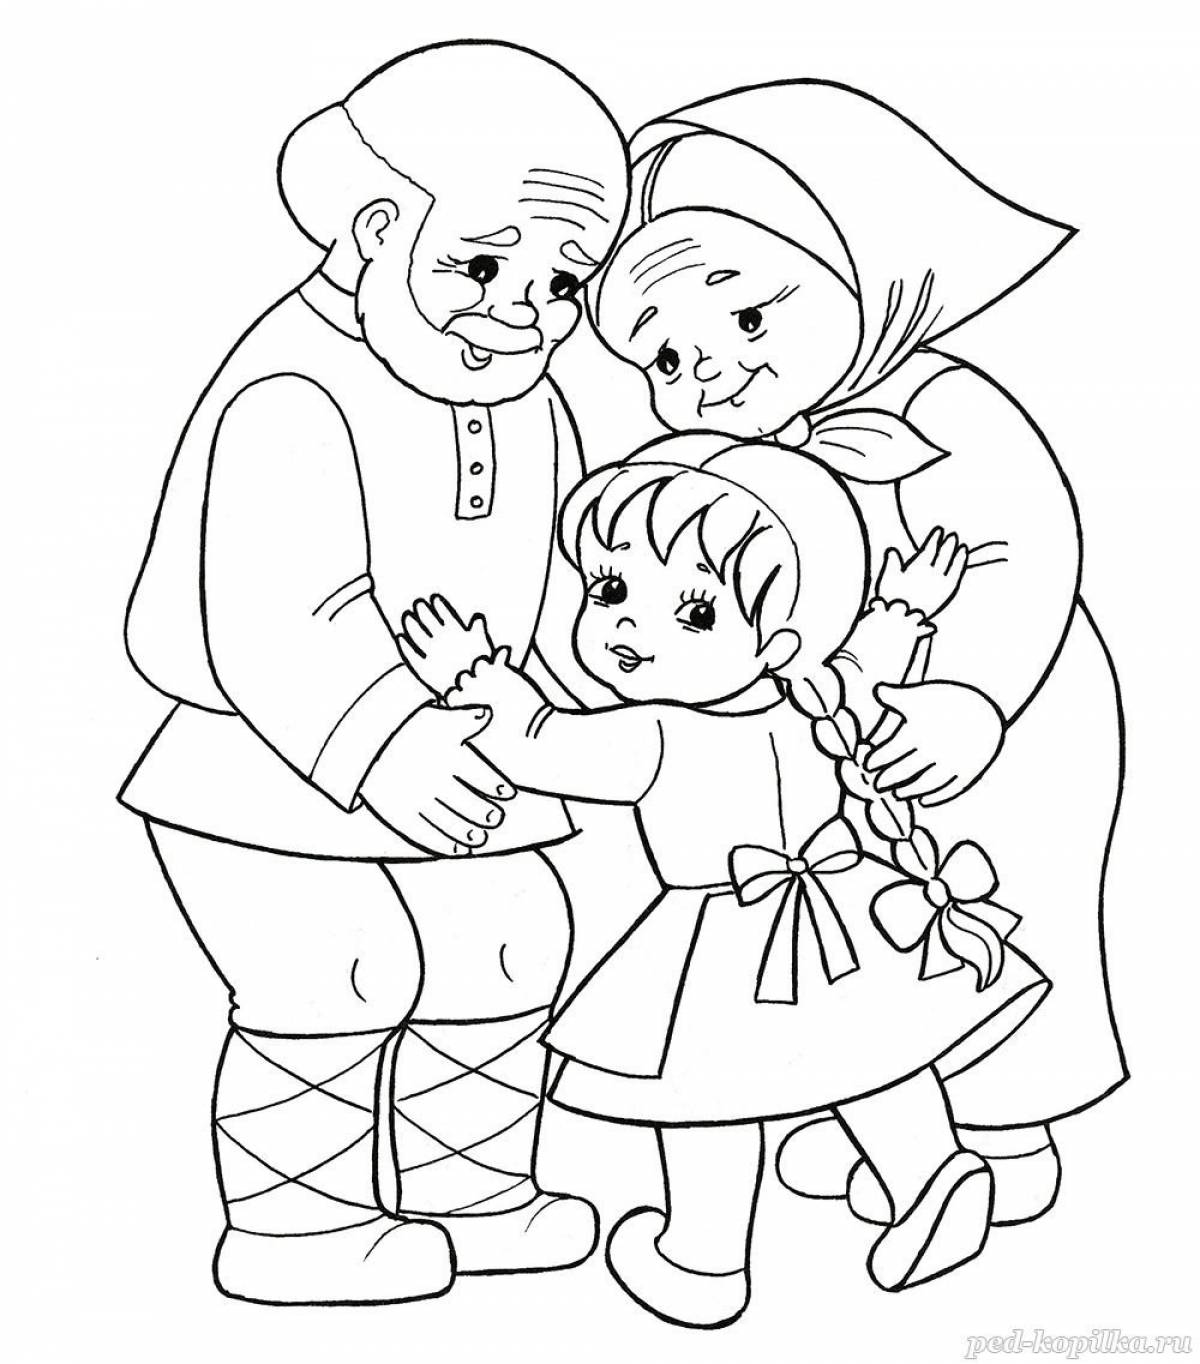 Drawing grandparents coloring pages for kids